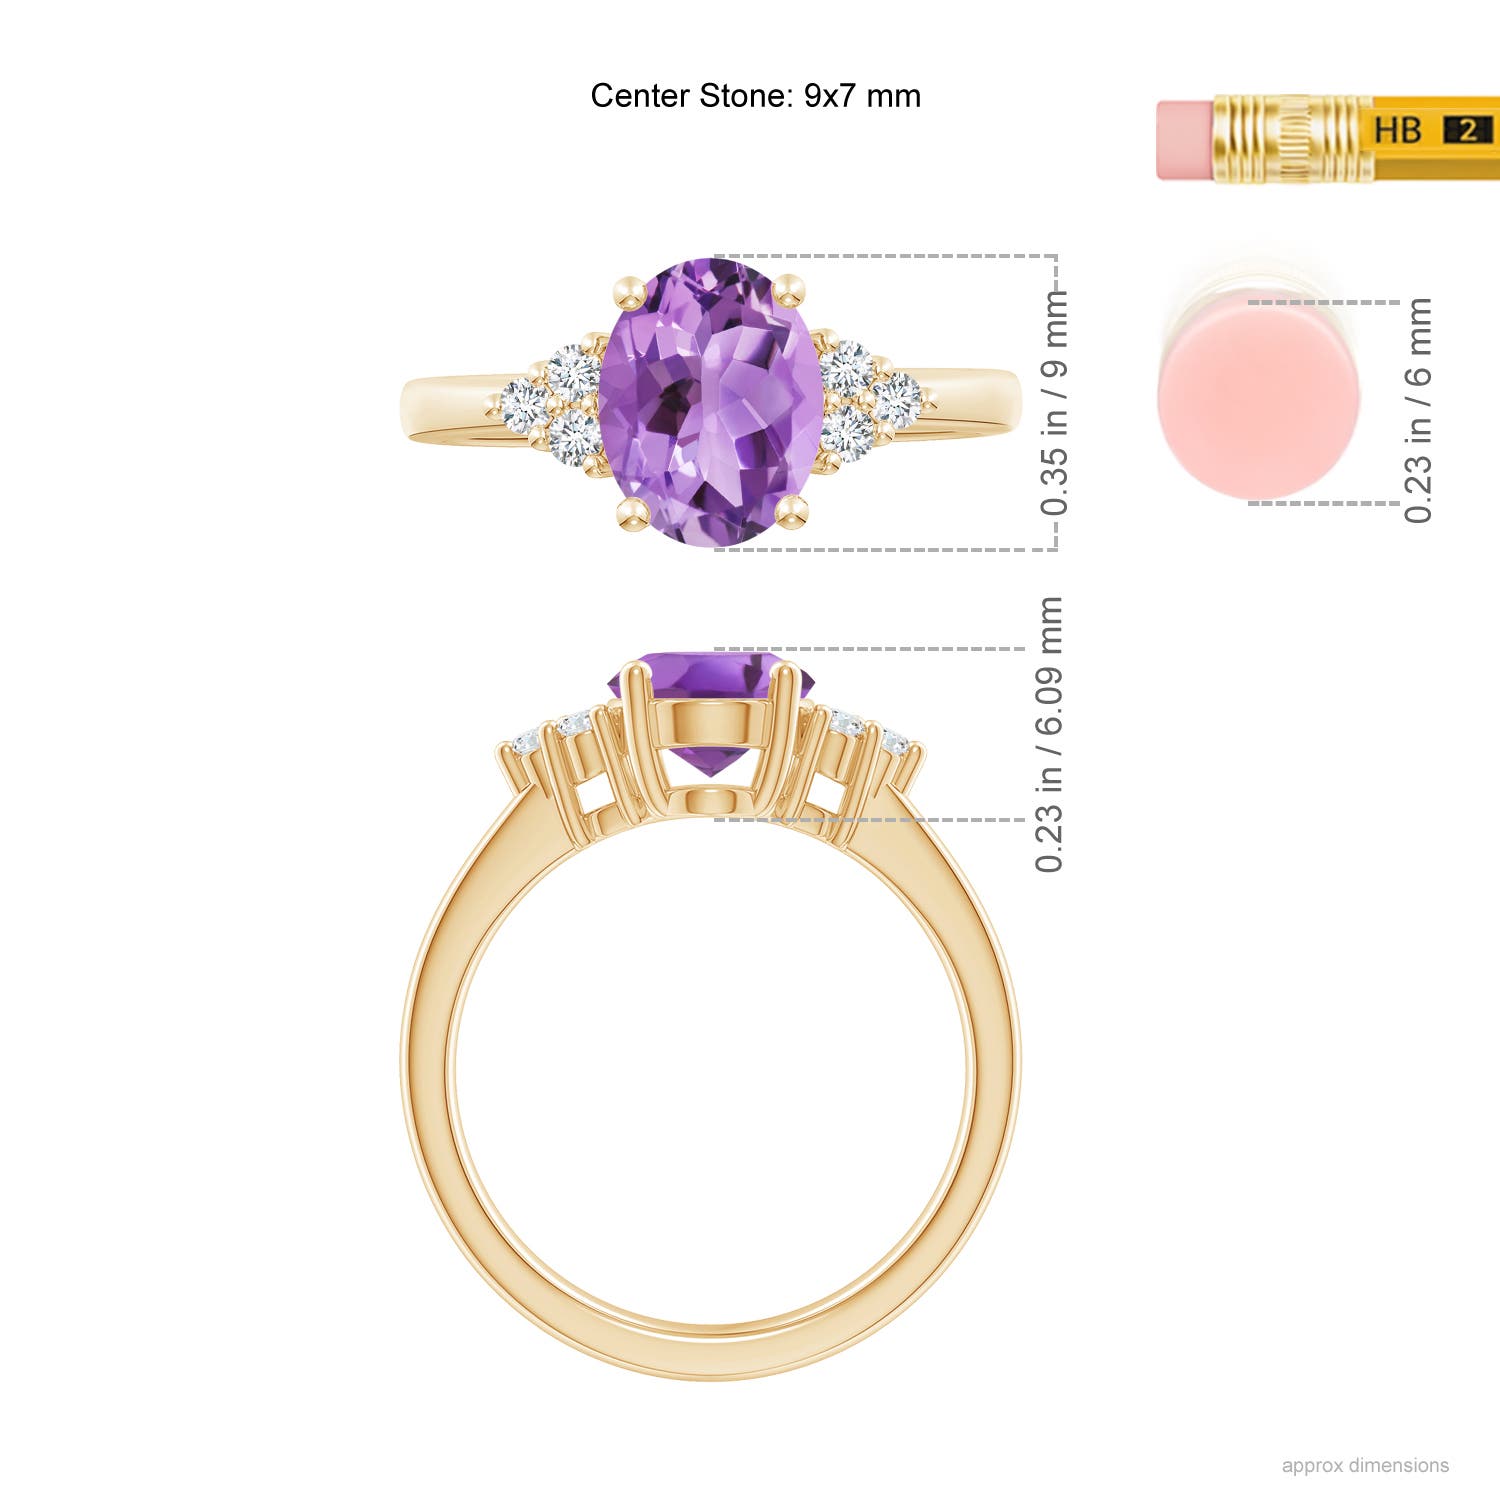 A - Amethyst / 1.75 CT / 14 KT Yellow Gold